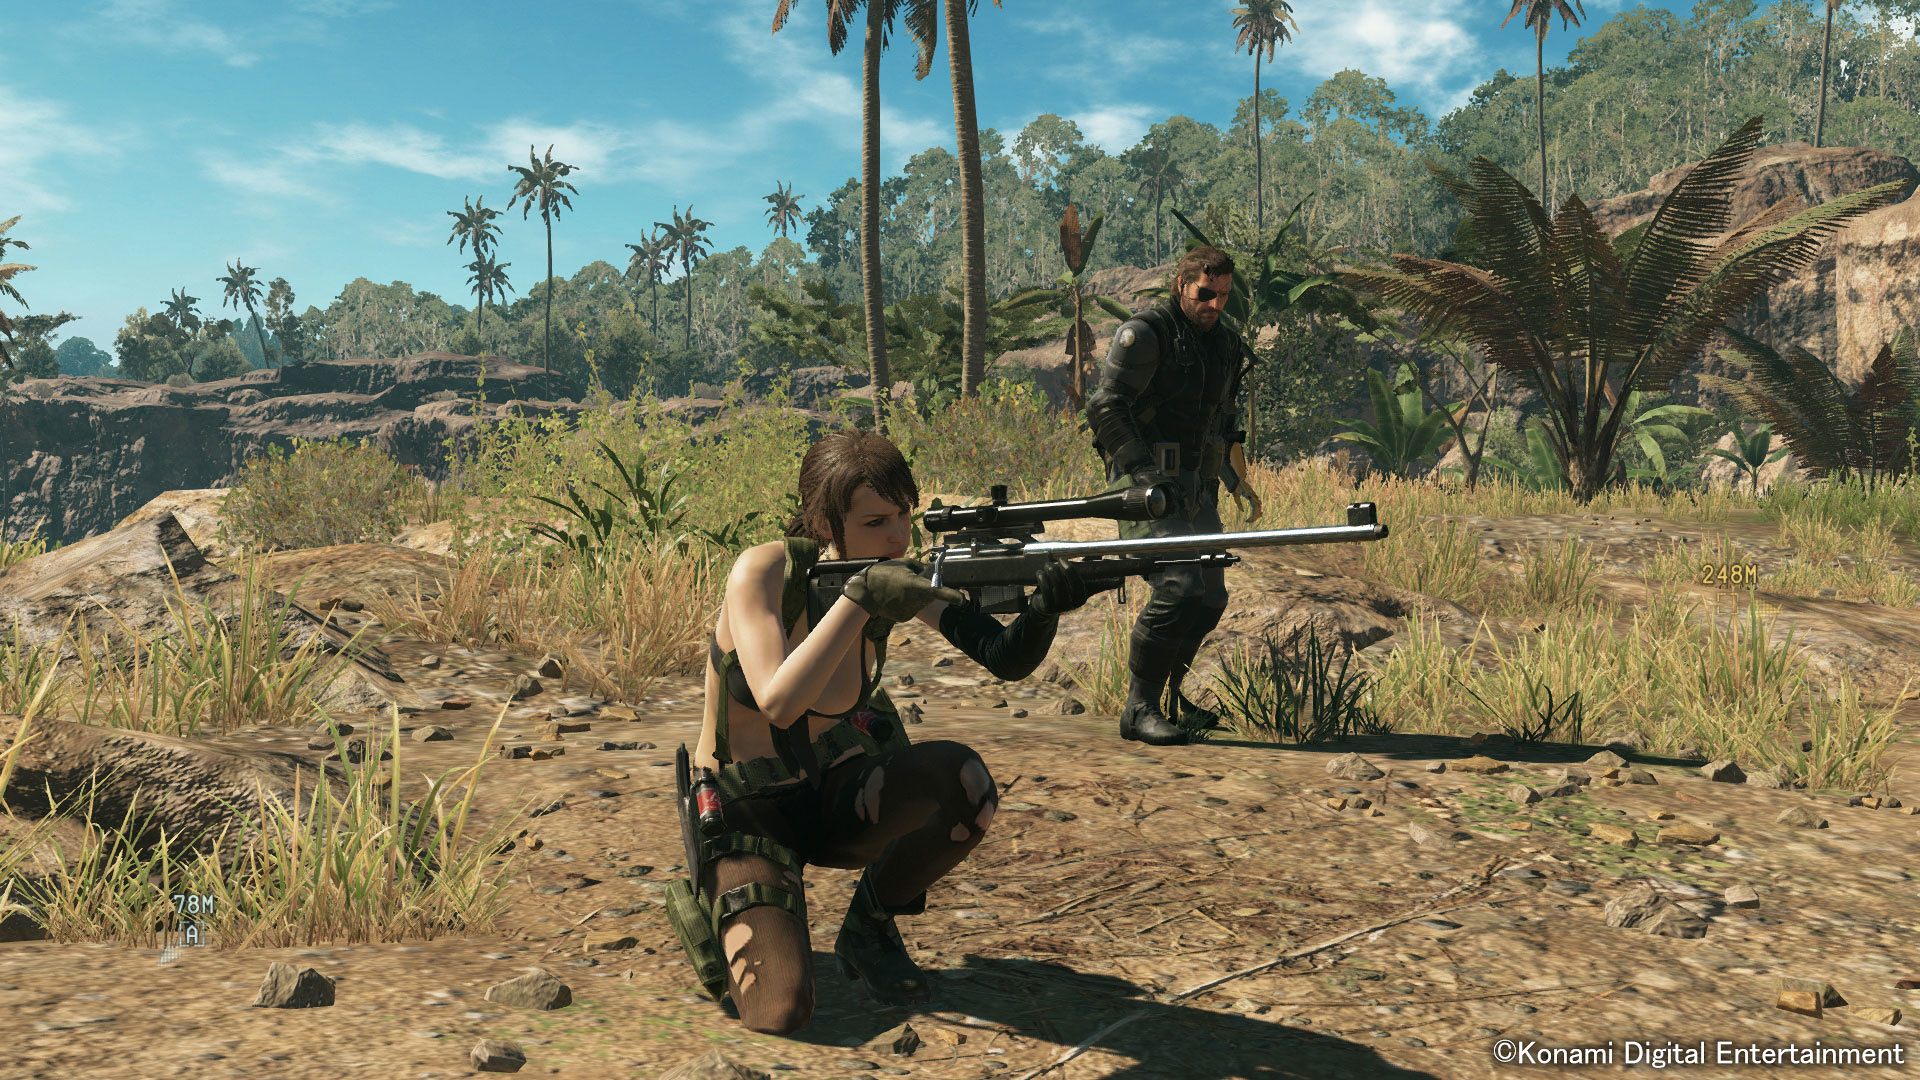 Download Metal Gear Solid 5 Pc